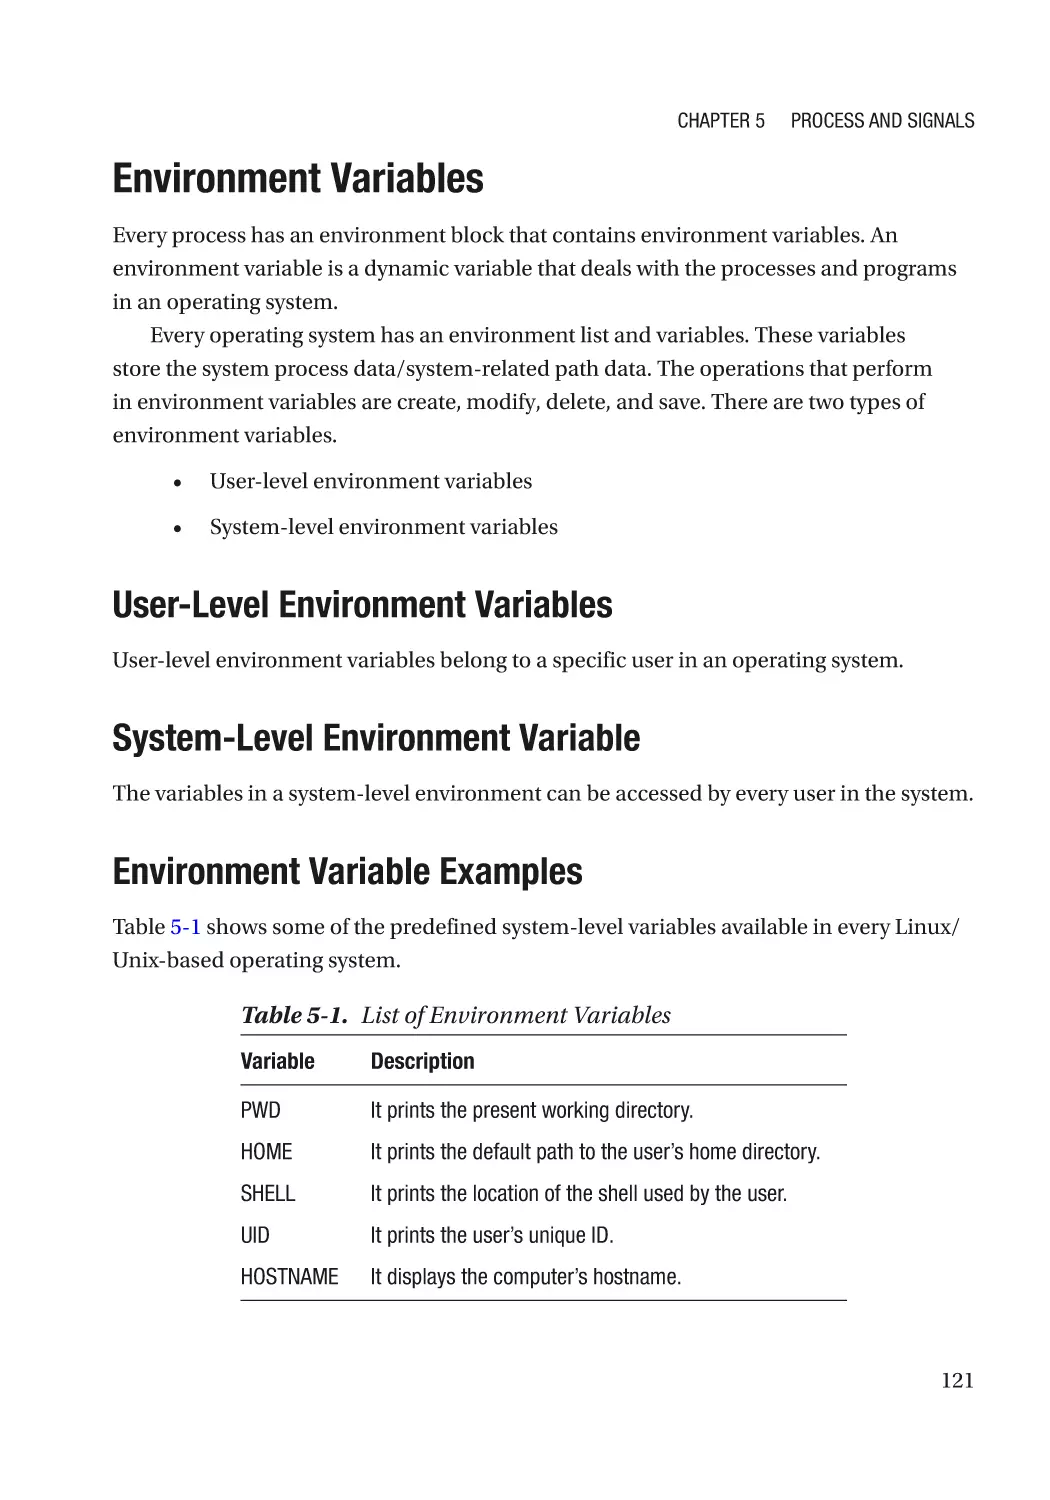 Environment Variables
User-Level Environment Variables
System-Level Environment Variable
Environment Variable Examples